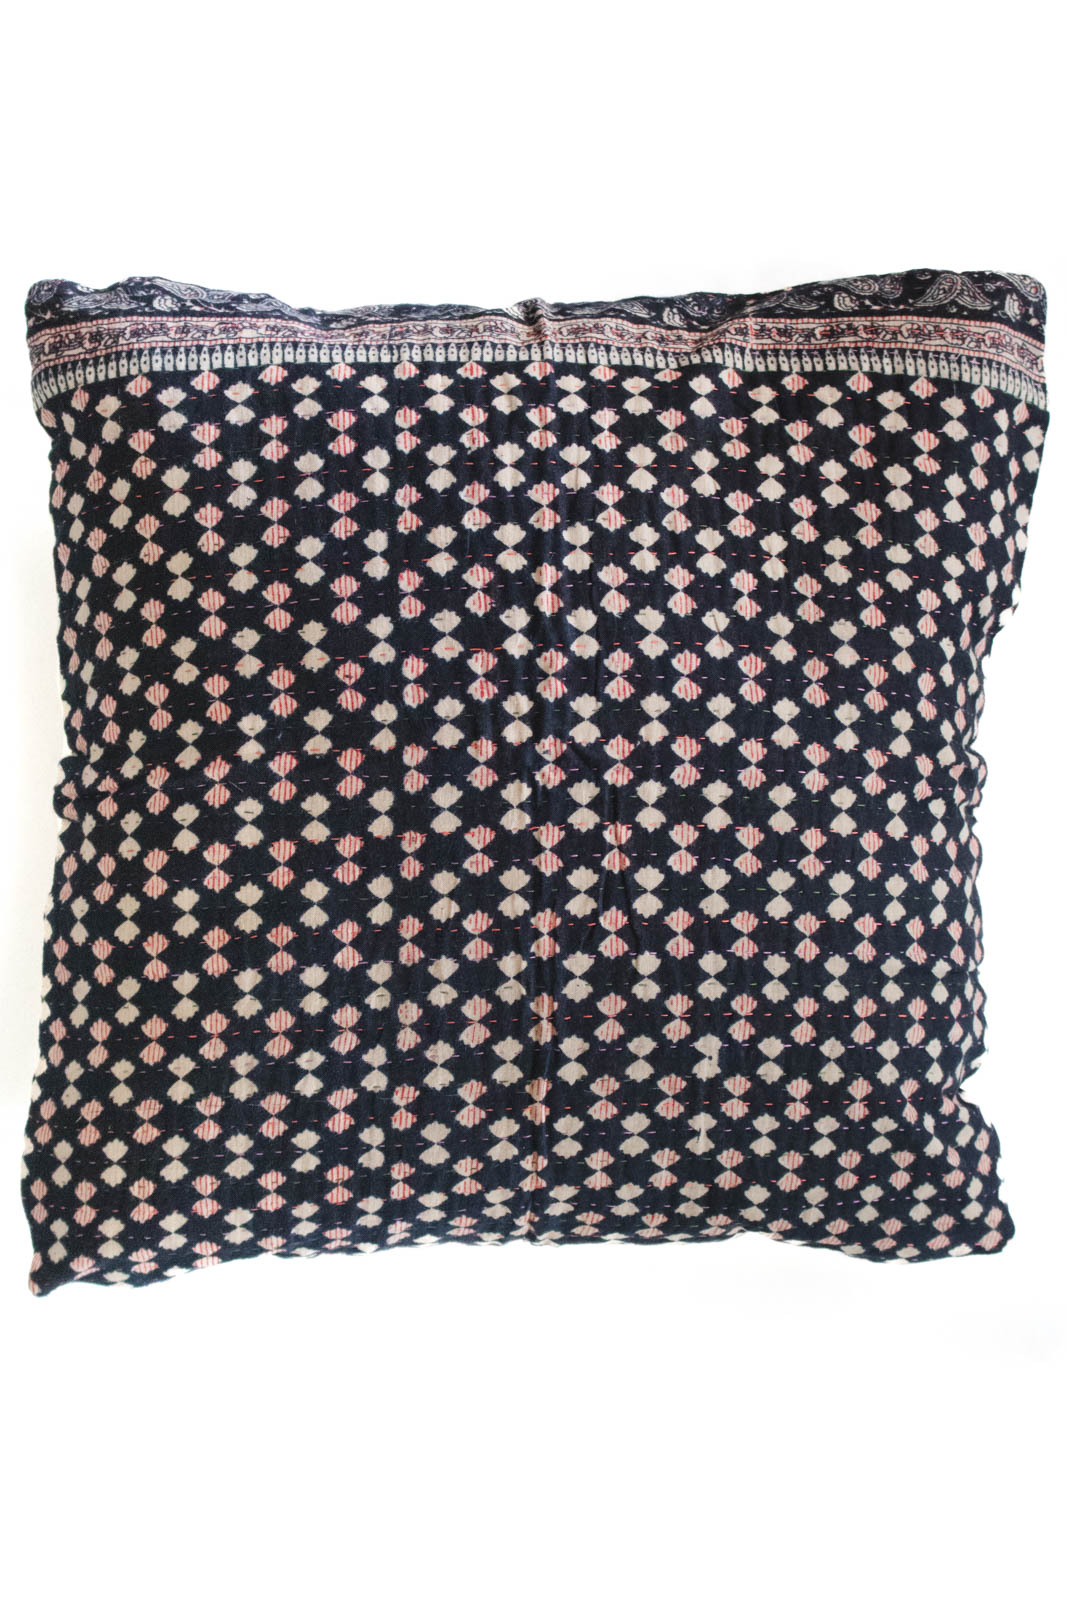 Fearless no. 4 Kantha Pillow Cover